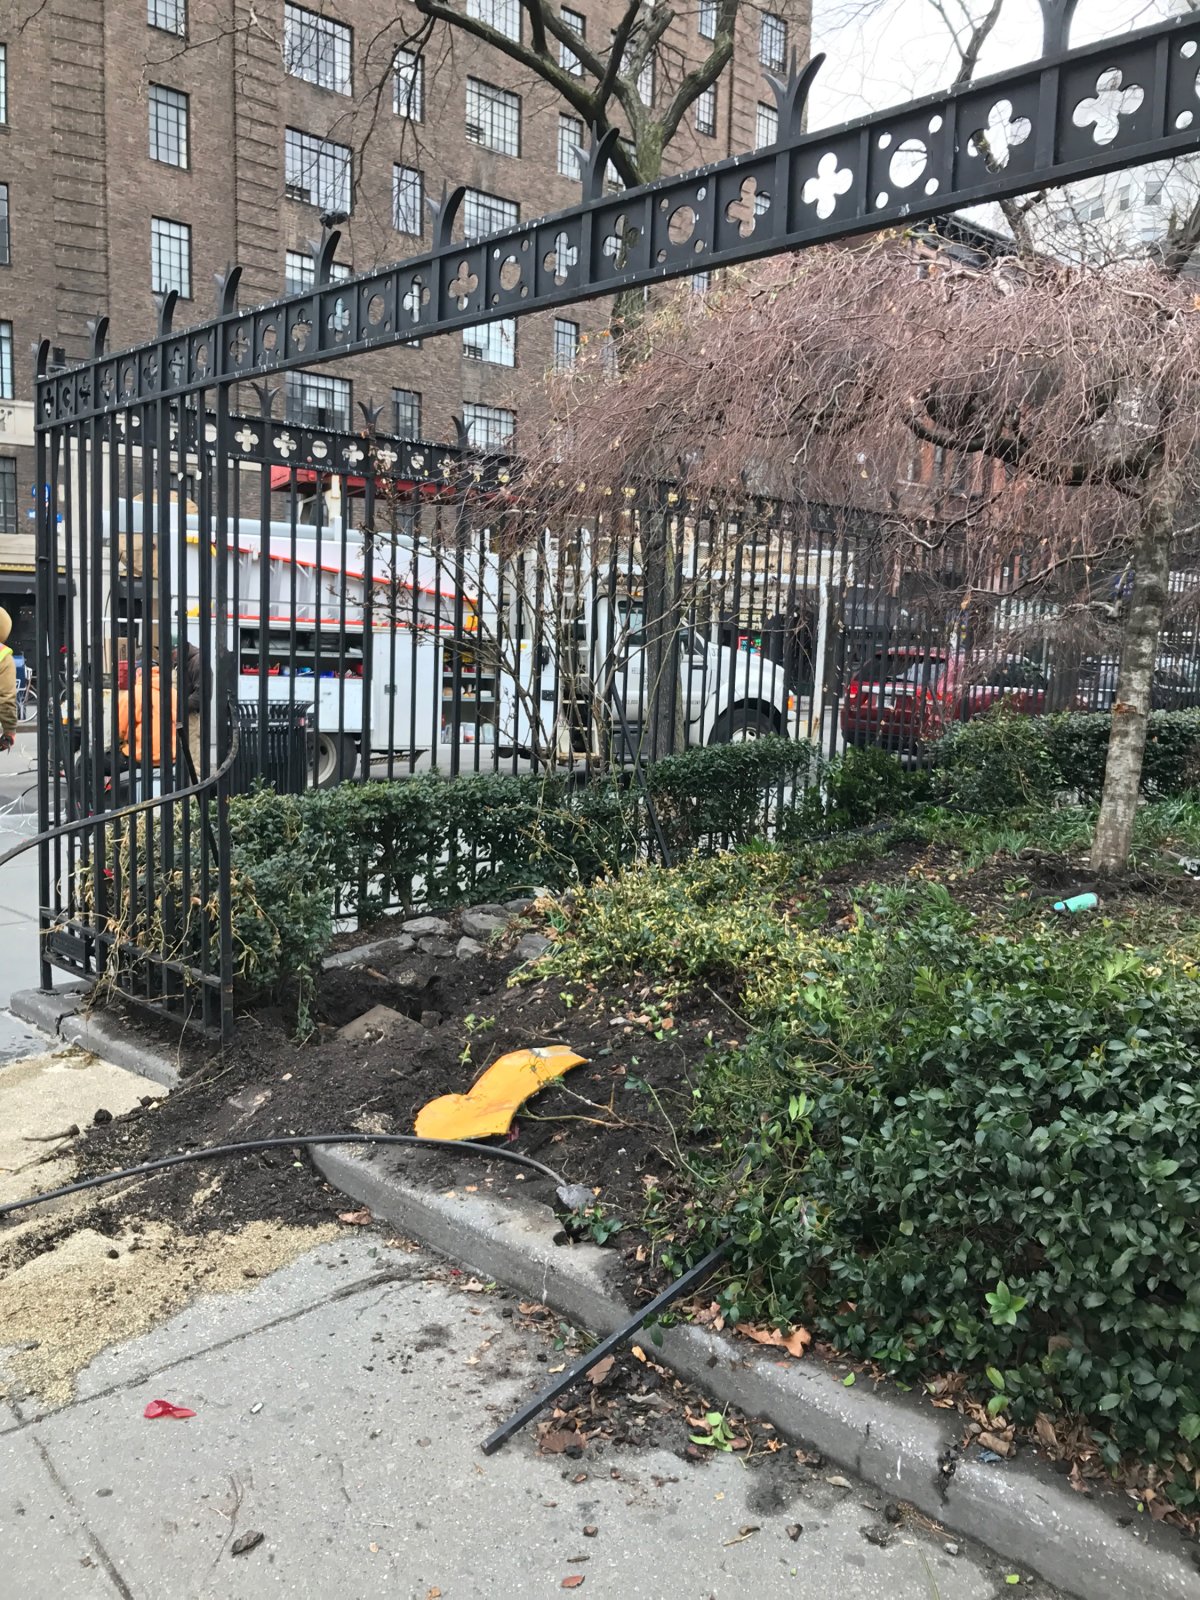 A runaway cab took out a big piece of the Jefferson Market Garden fence early Sunday morning. Part of its bumper was still visible inside the green spot later that morning when a garden volunteer snapped this photo. Photo courtesy Jefferson Market Garden